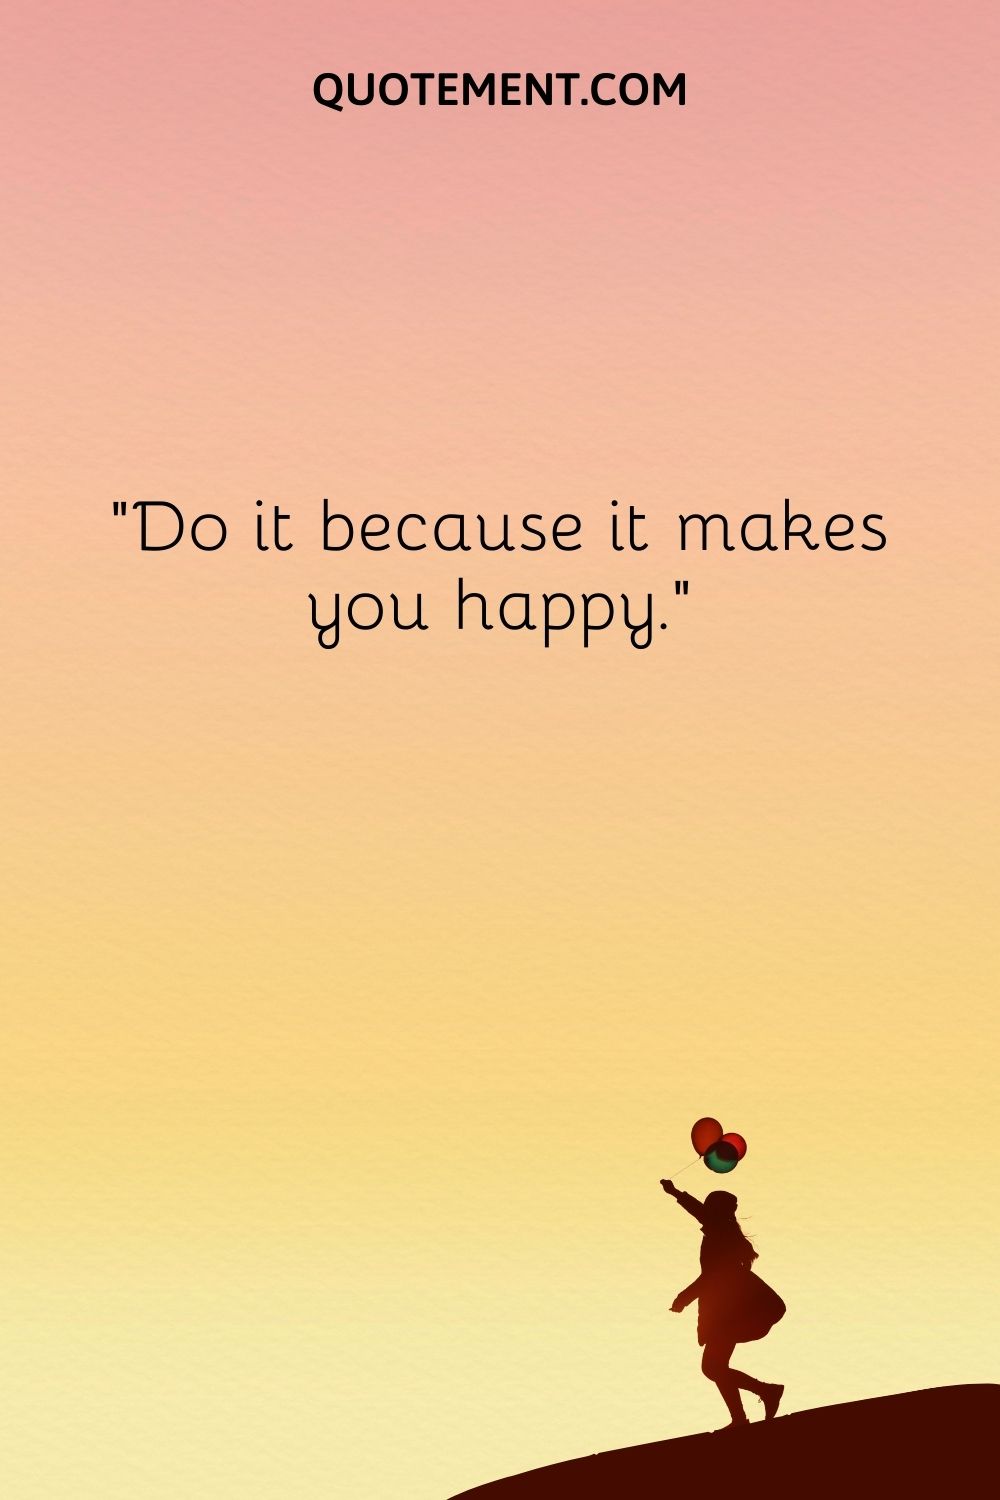 Do it because it makes you happy